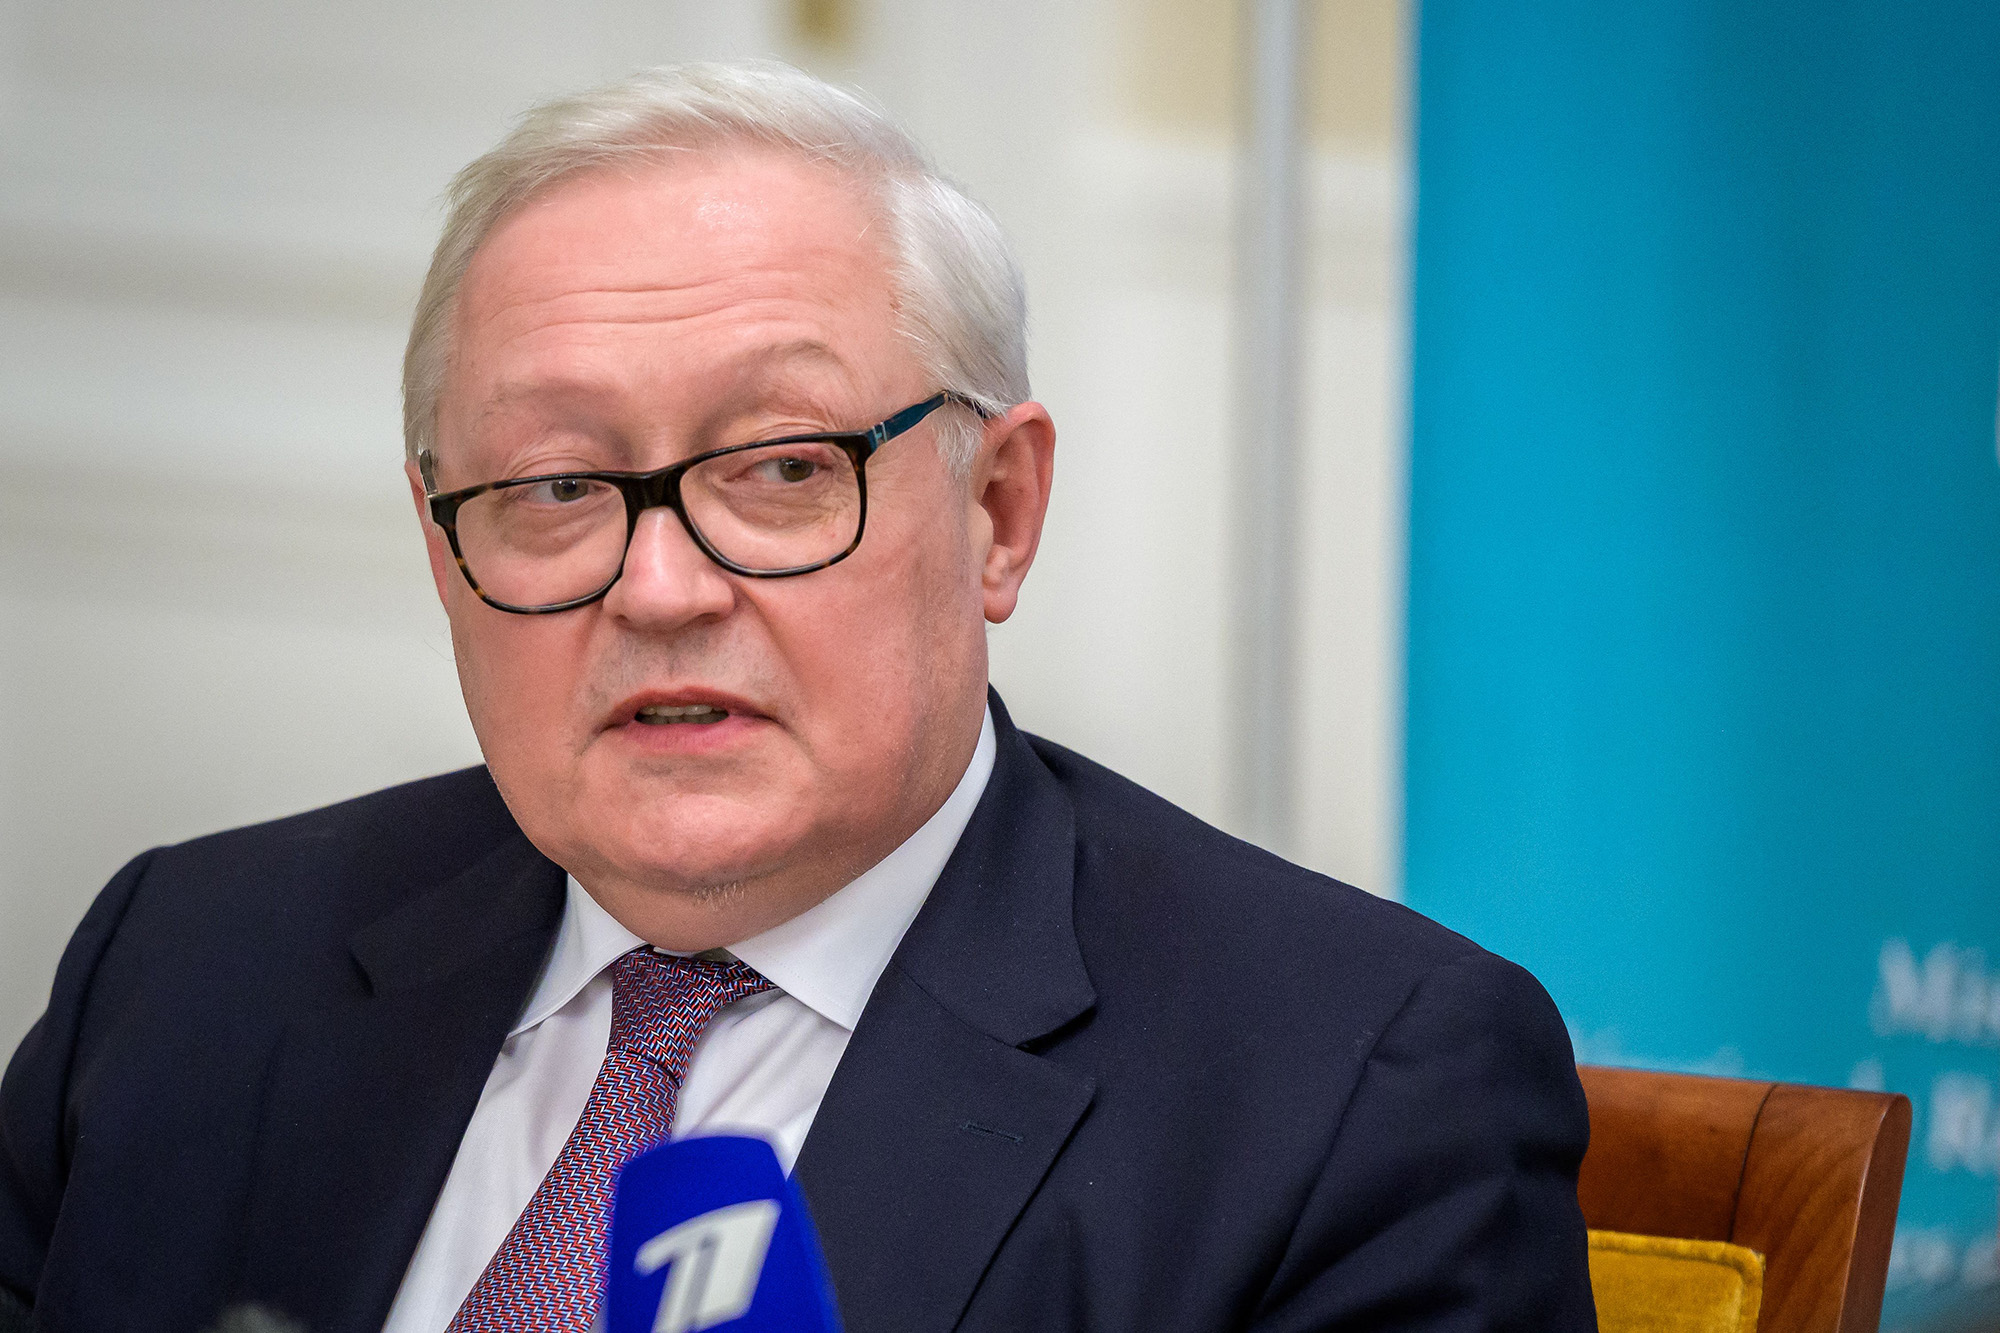 Russian Deputy Foreign Minister Sergei Ryabkov looks on during a press conference following talks with his US counterpart on soaring tensions over Ukraine, in Geneva, on Jan. 10.